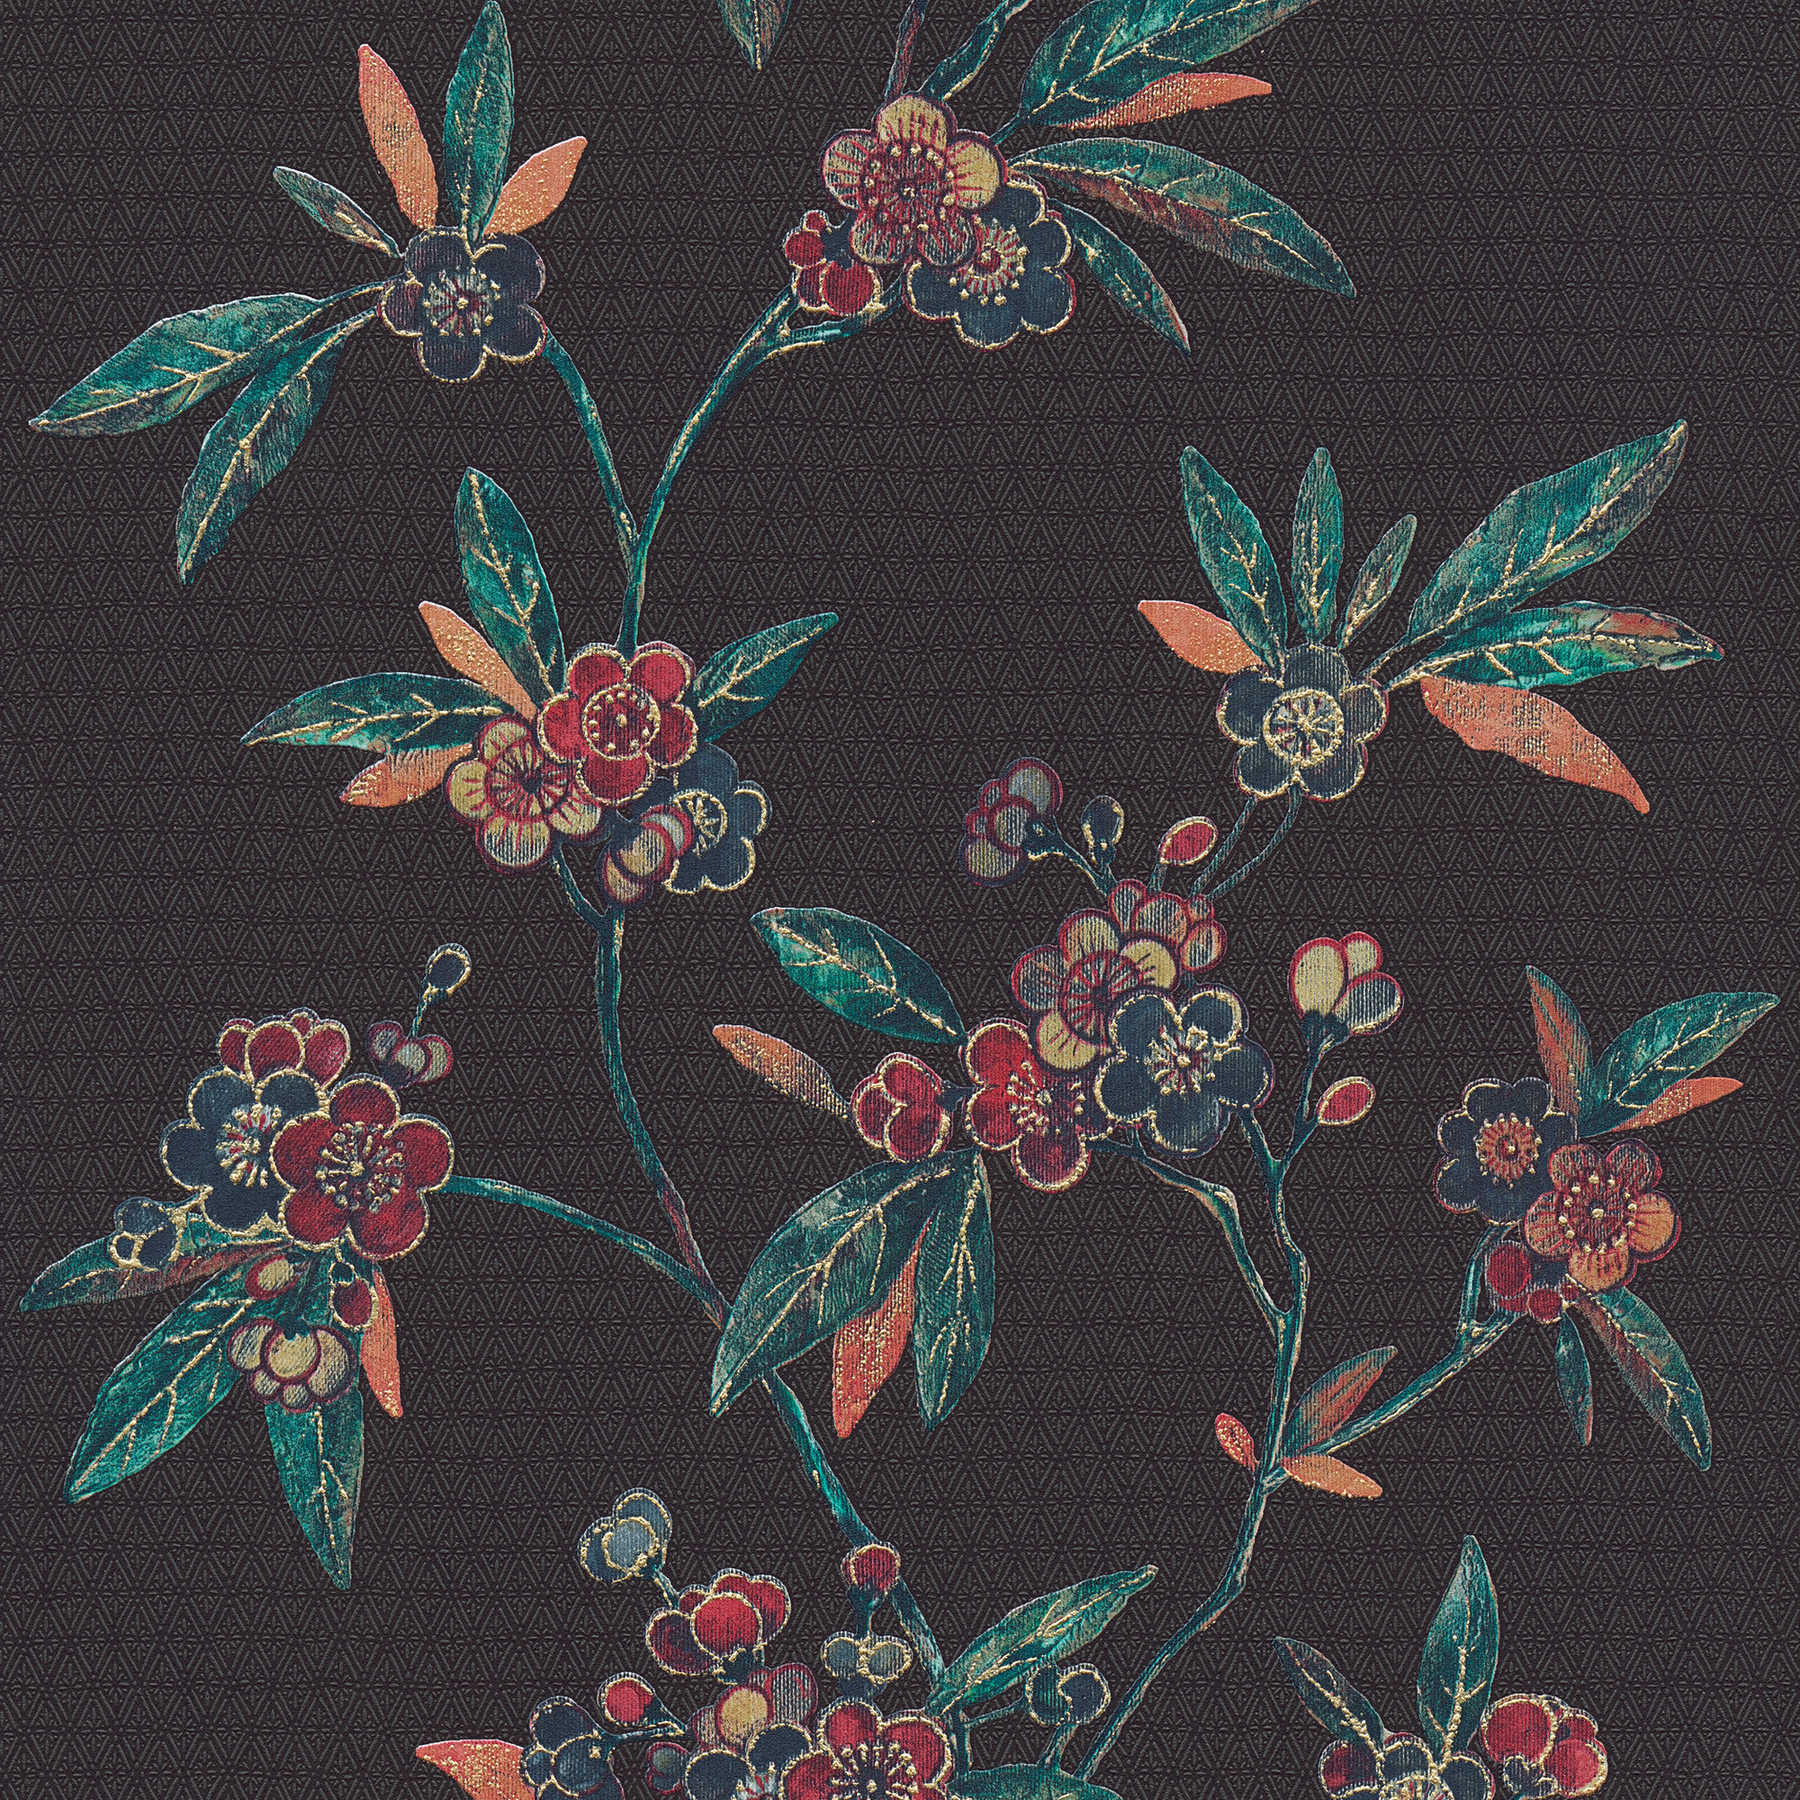 Floral wallpaper with flower tendrils in Asian style - black, green, red
